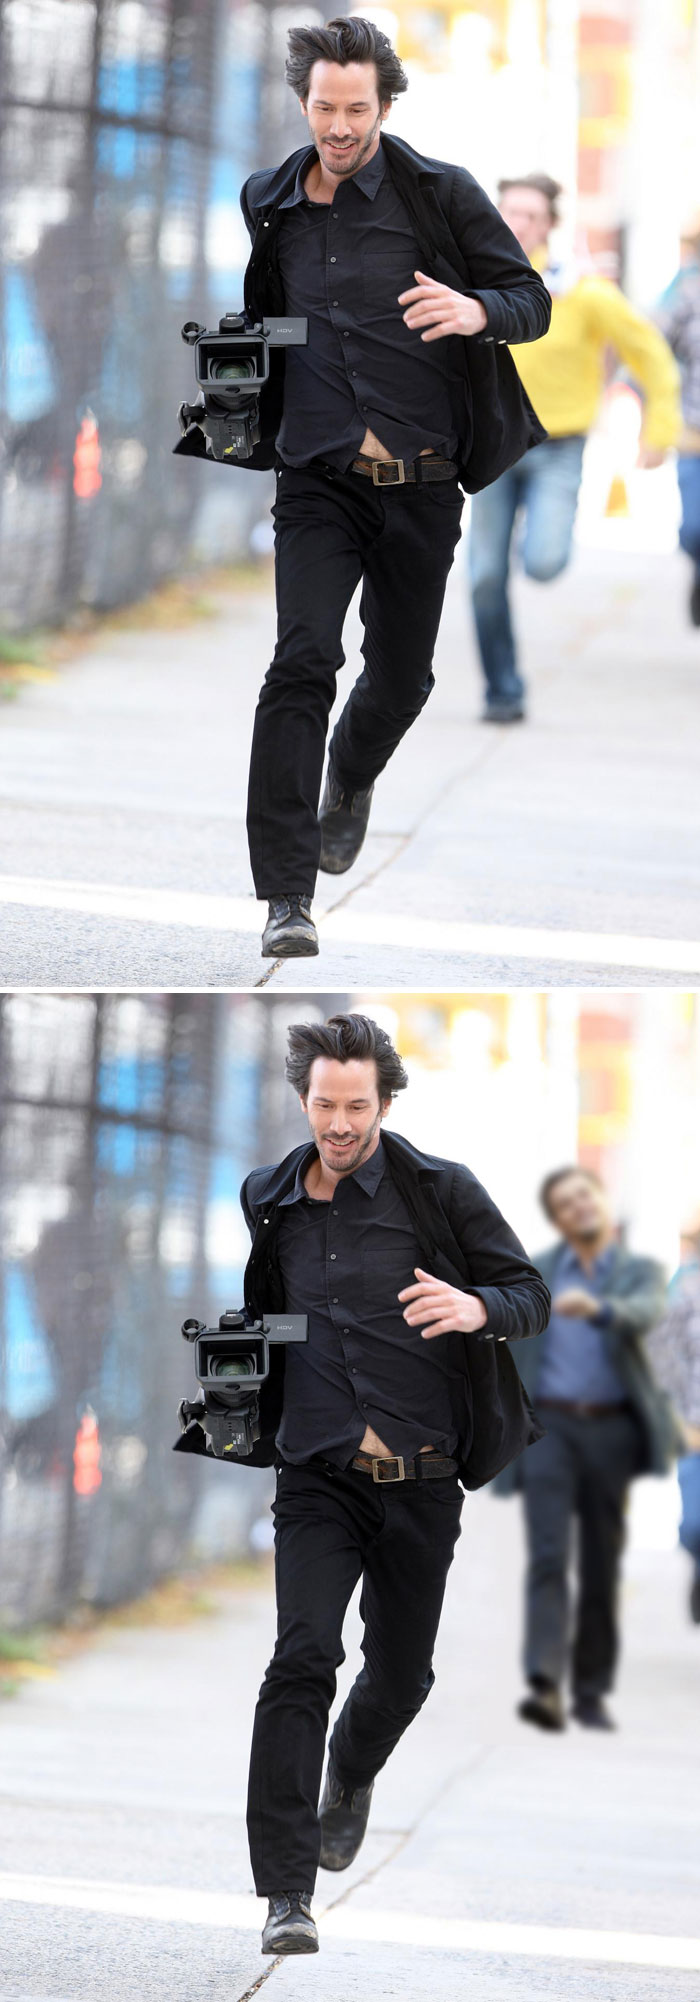 Keanu Reeves Running After Stealing The Camera Of A Paparazzi